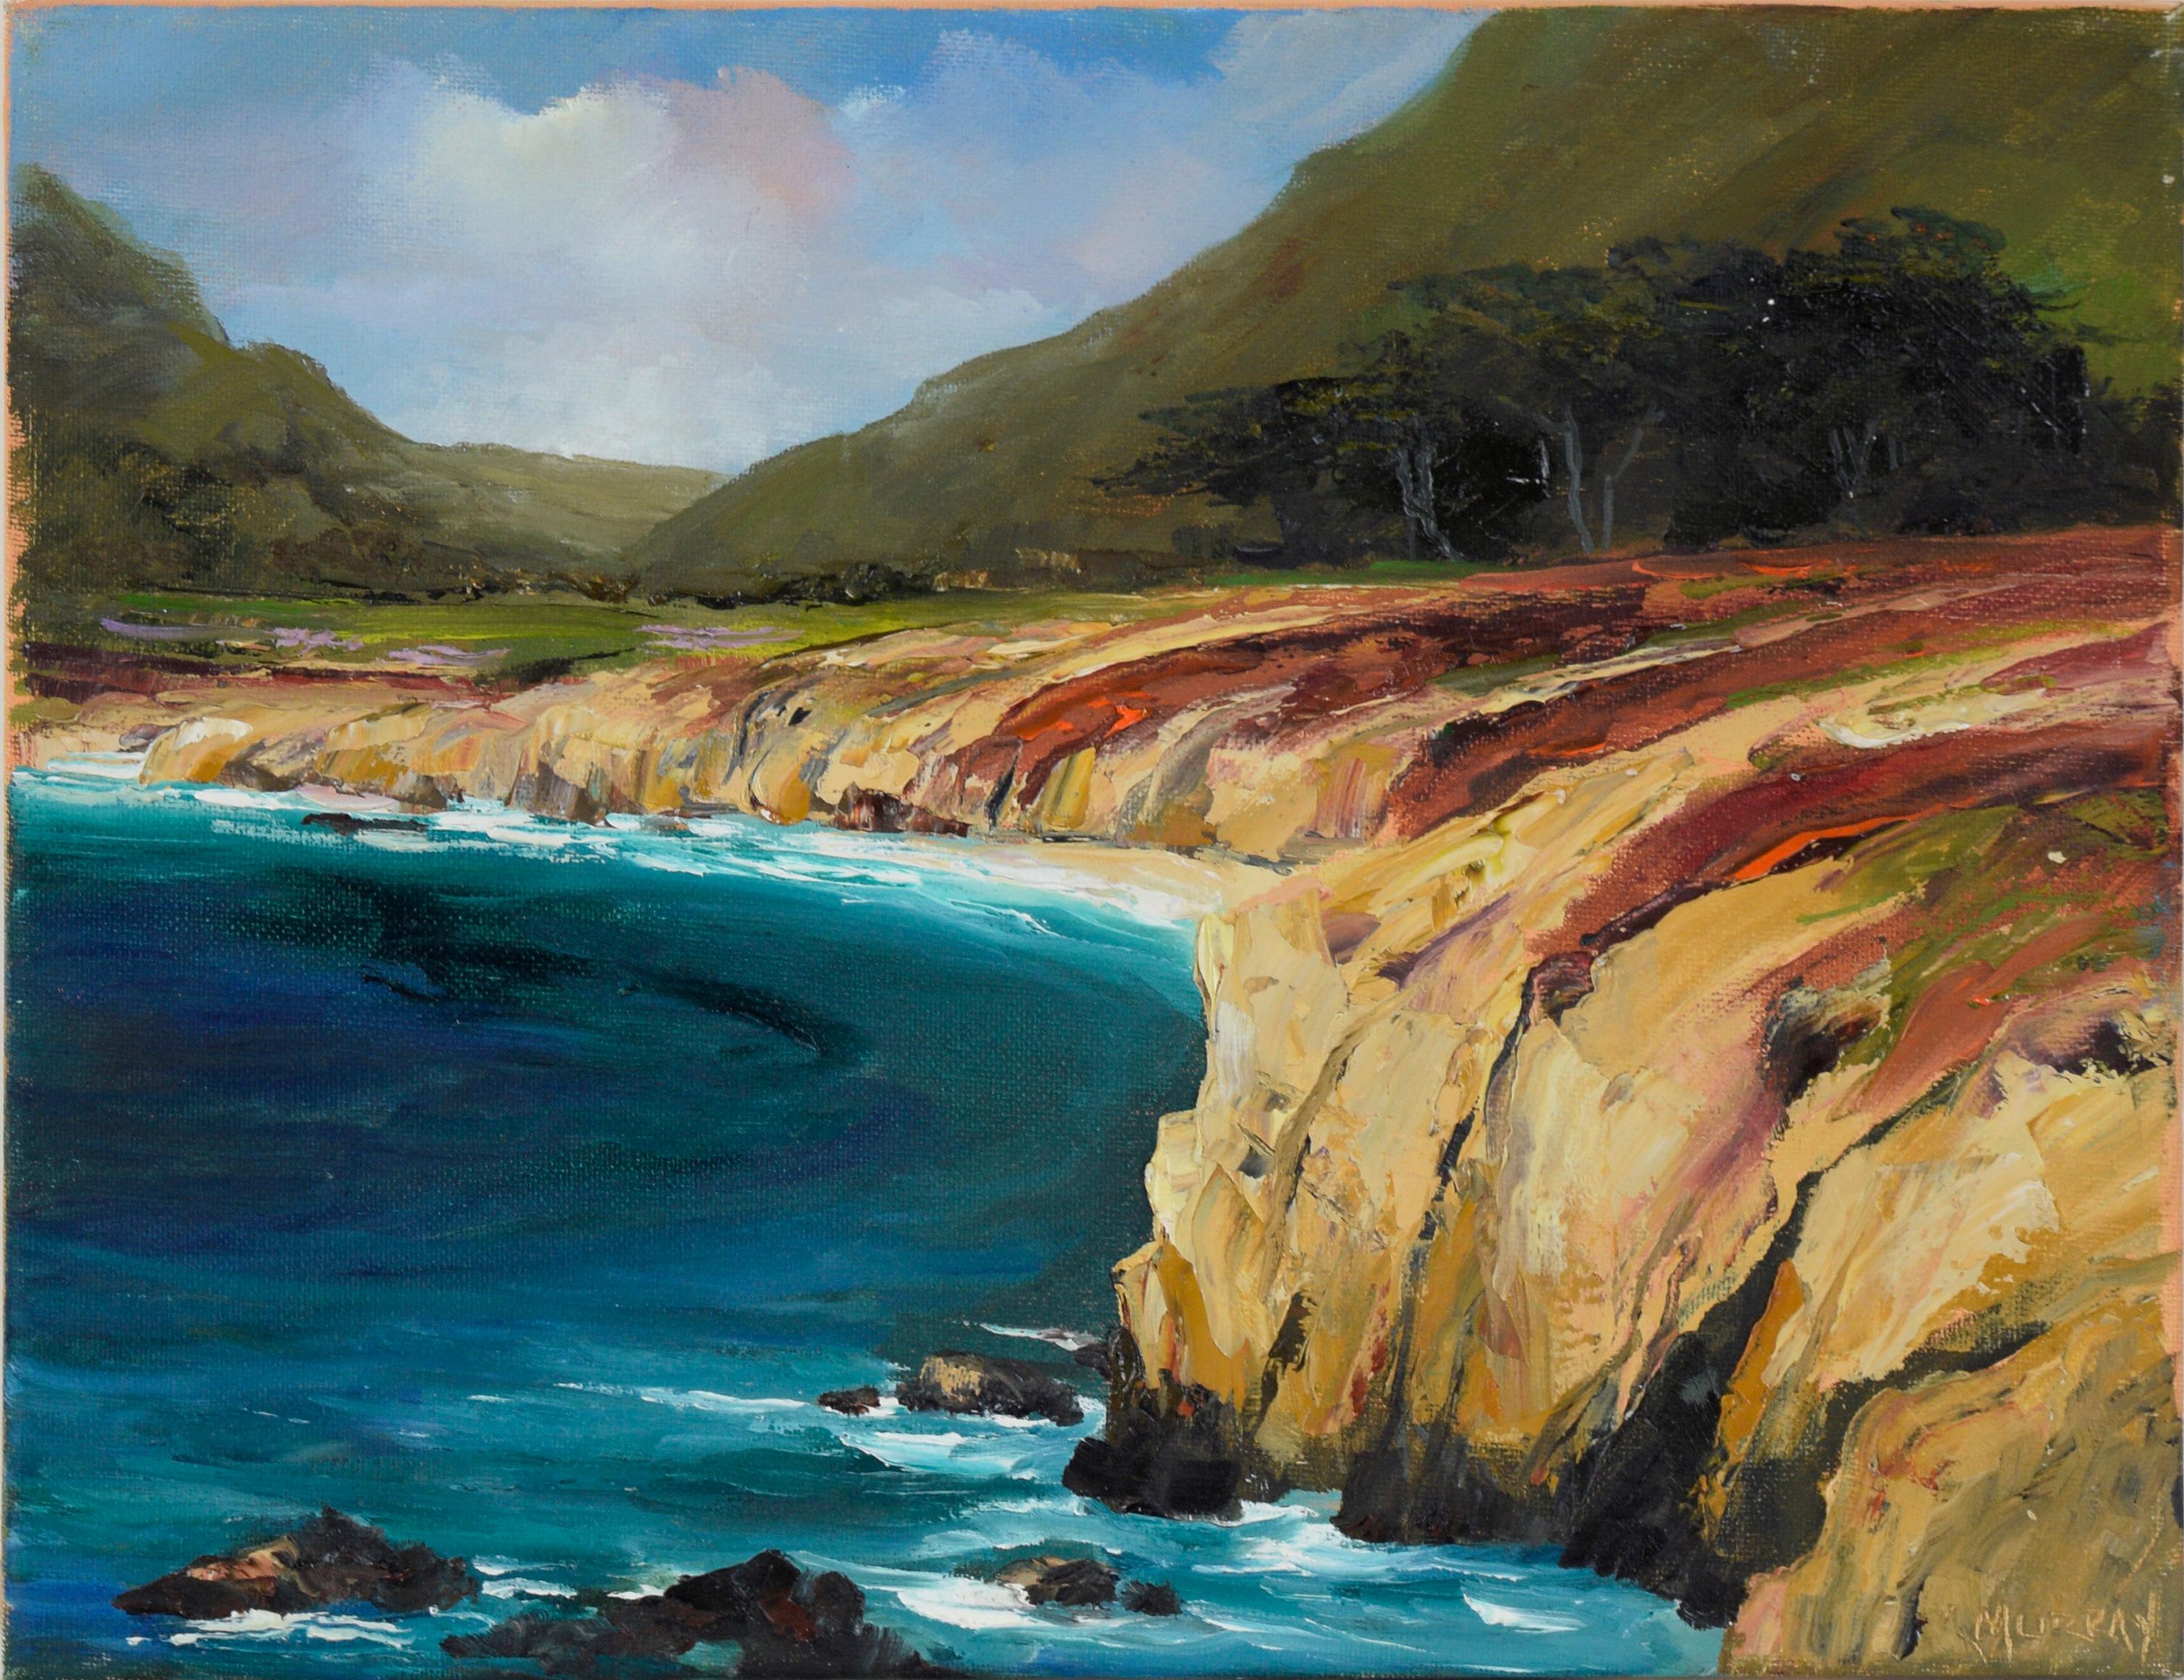 Kathleen Murray Landscape Painting - Coastal Cliffs and Lush Valley - Pacific Coast Big Sur Seascape in Oil on Canvas